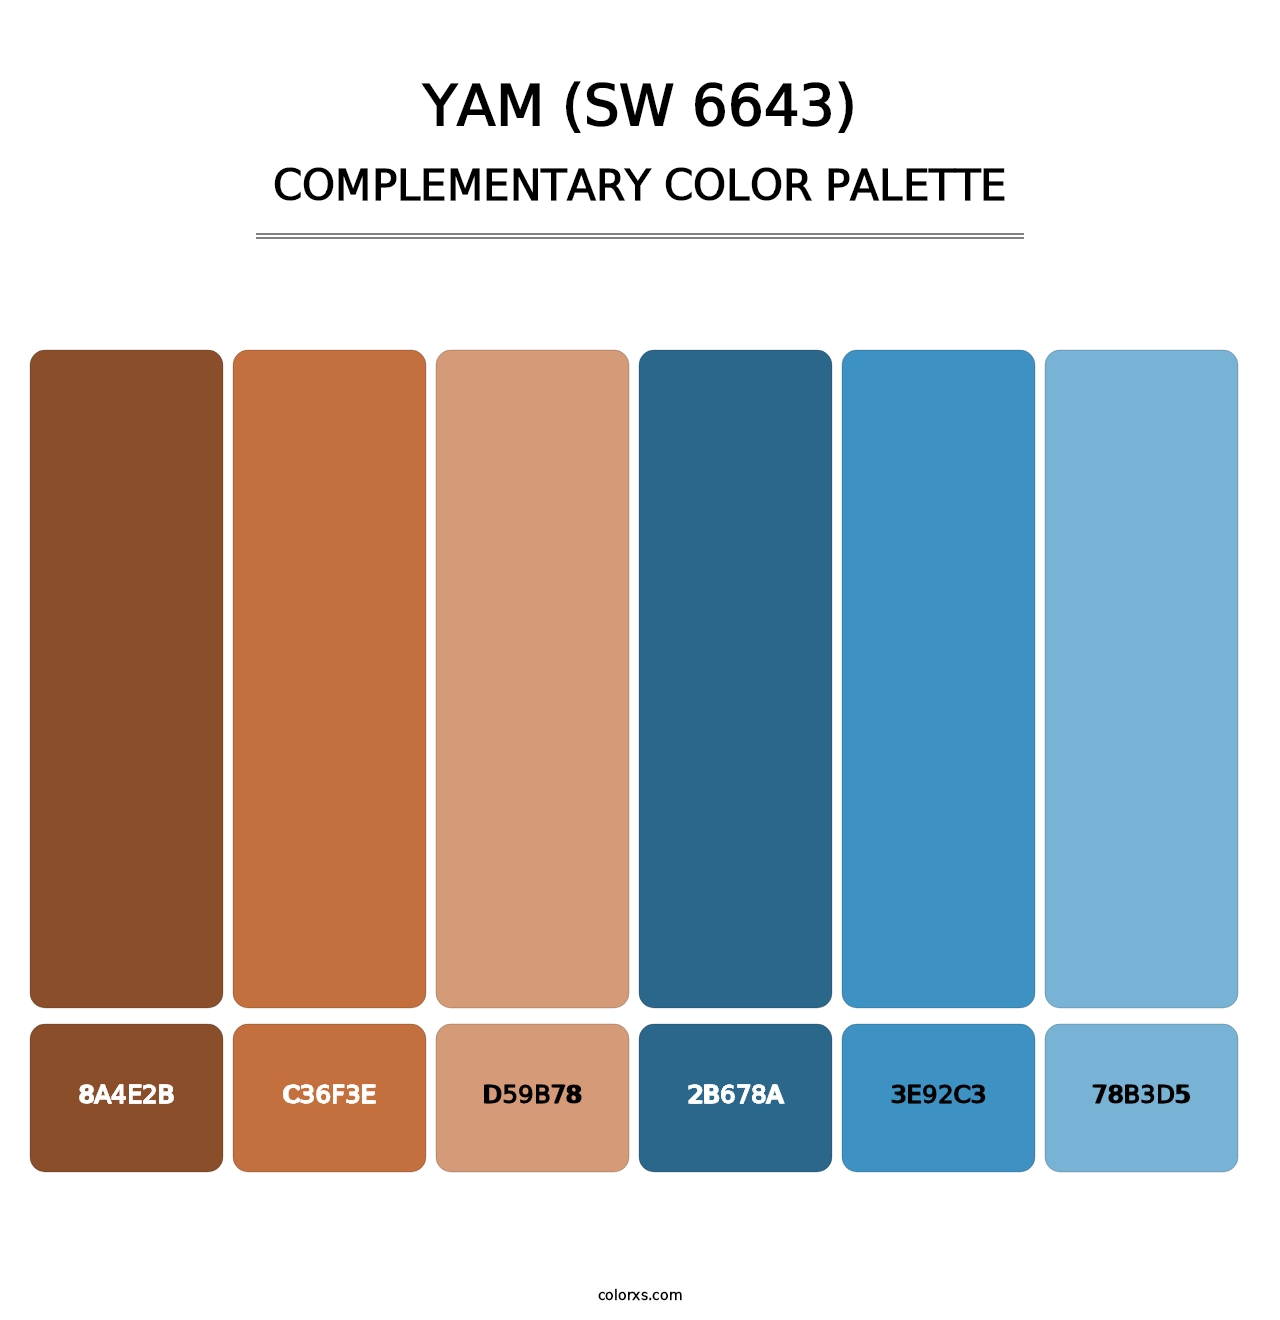 Yam (SW 6643) - Complementary Color Palette